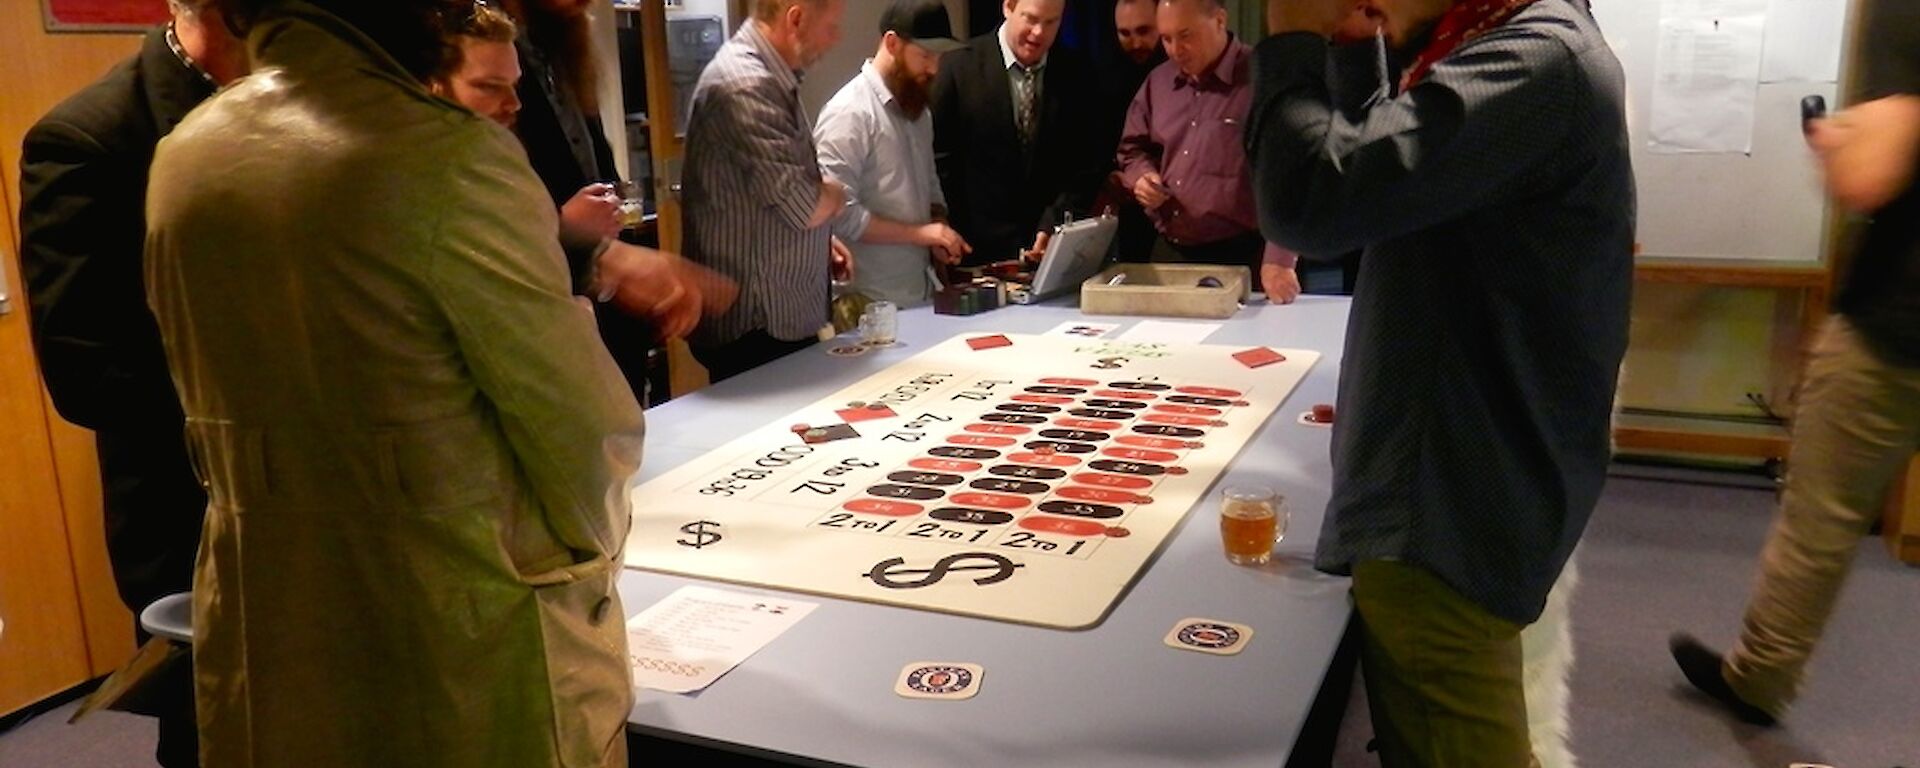 Roulette players standing around the makeshift roulette table.